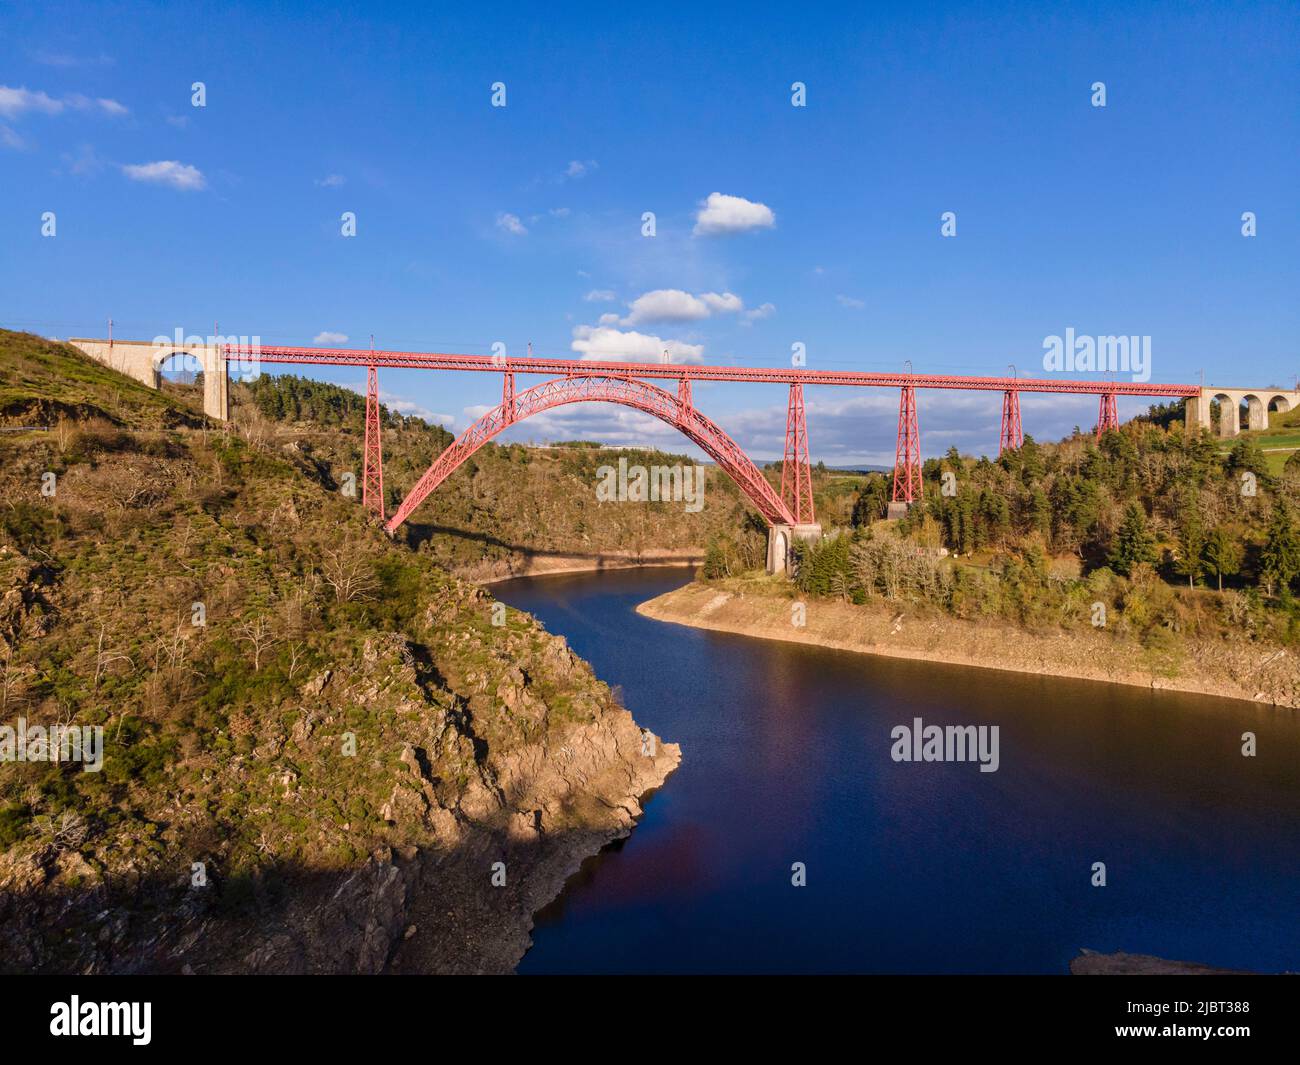 France, Cantal, Ruynes en Margeride, the Truyere river canyon and Garabit viaduct built by Gustave Eiffel (aerial view) Stock Photo